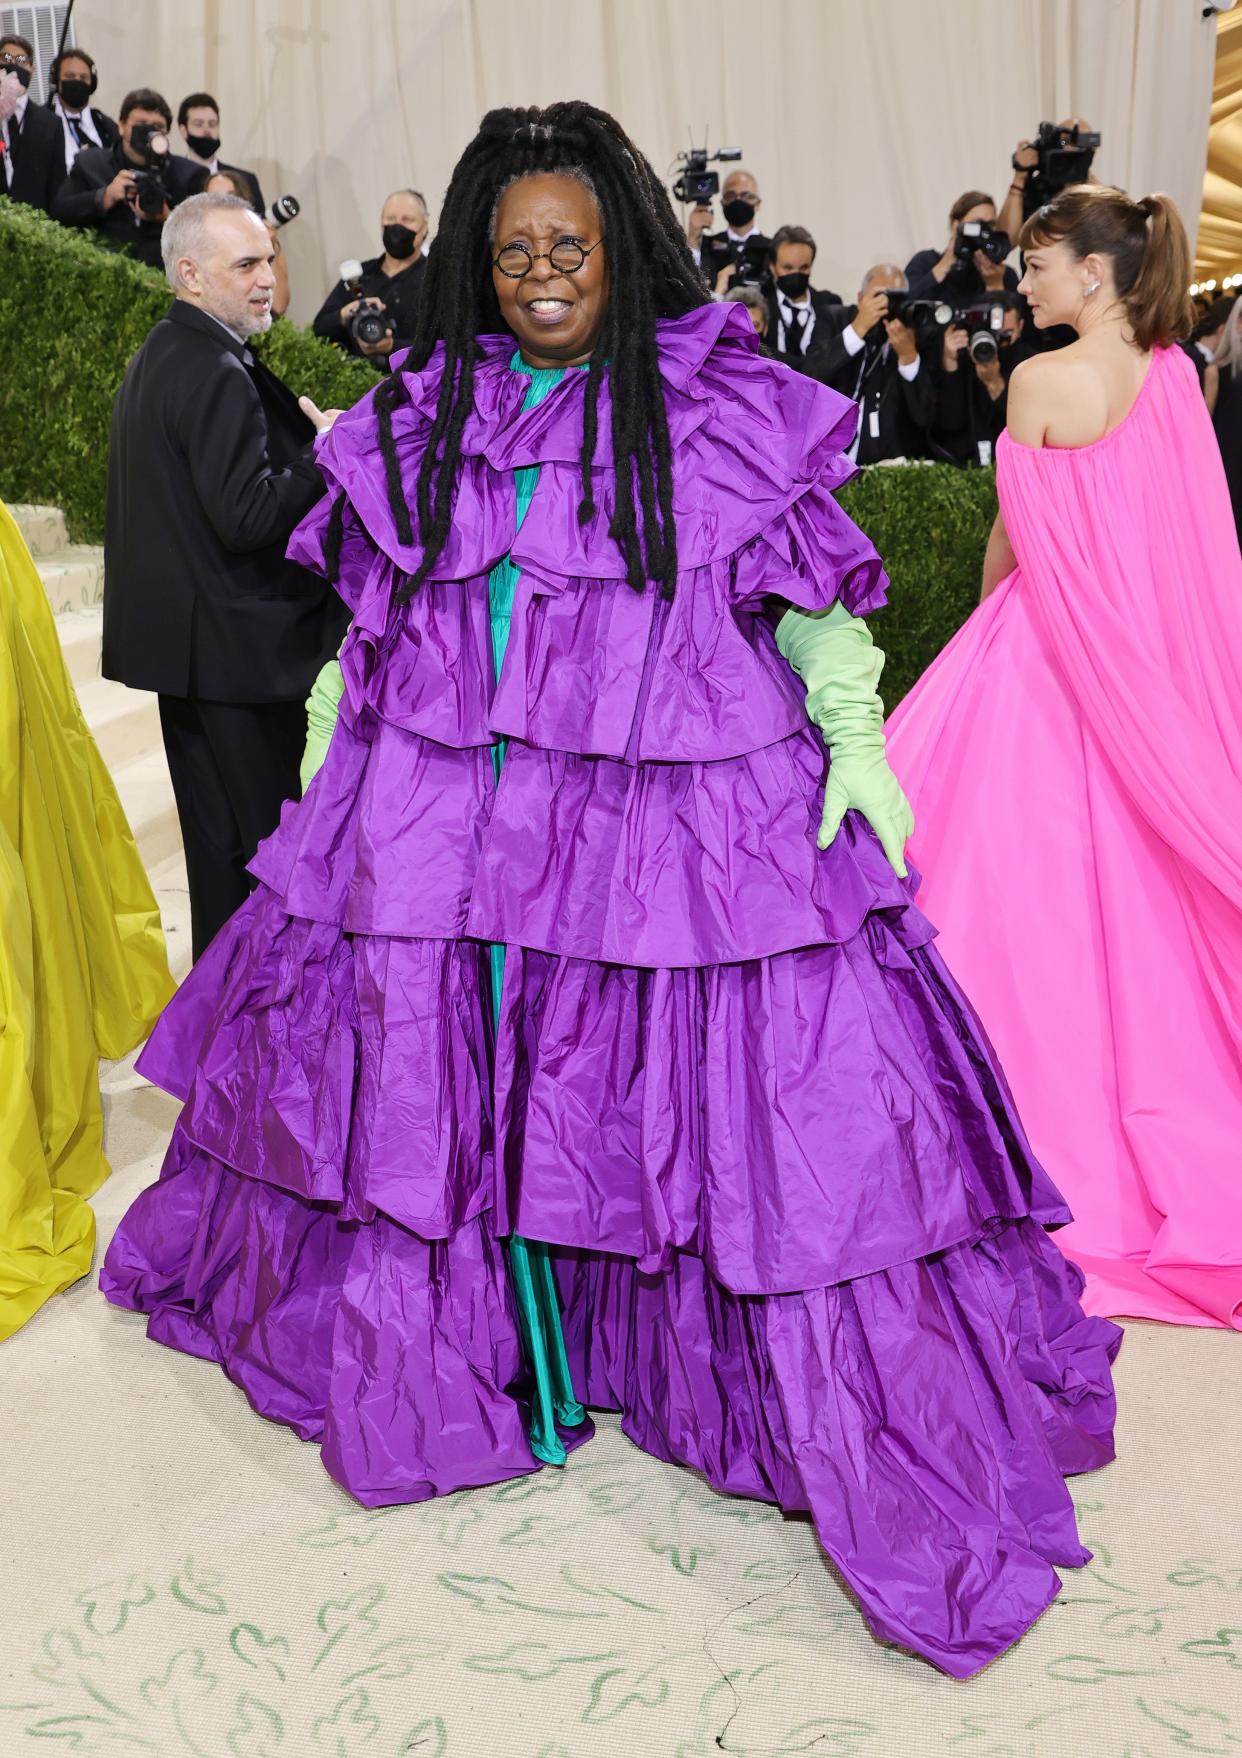 Whoopi Goldberg attends The 2021 Met Gala Celebrating In America: A Lexicon Of Fashion at Metropolitan Museum of Art on Sept. 13, 2021 in New York.